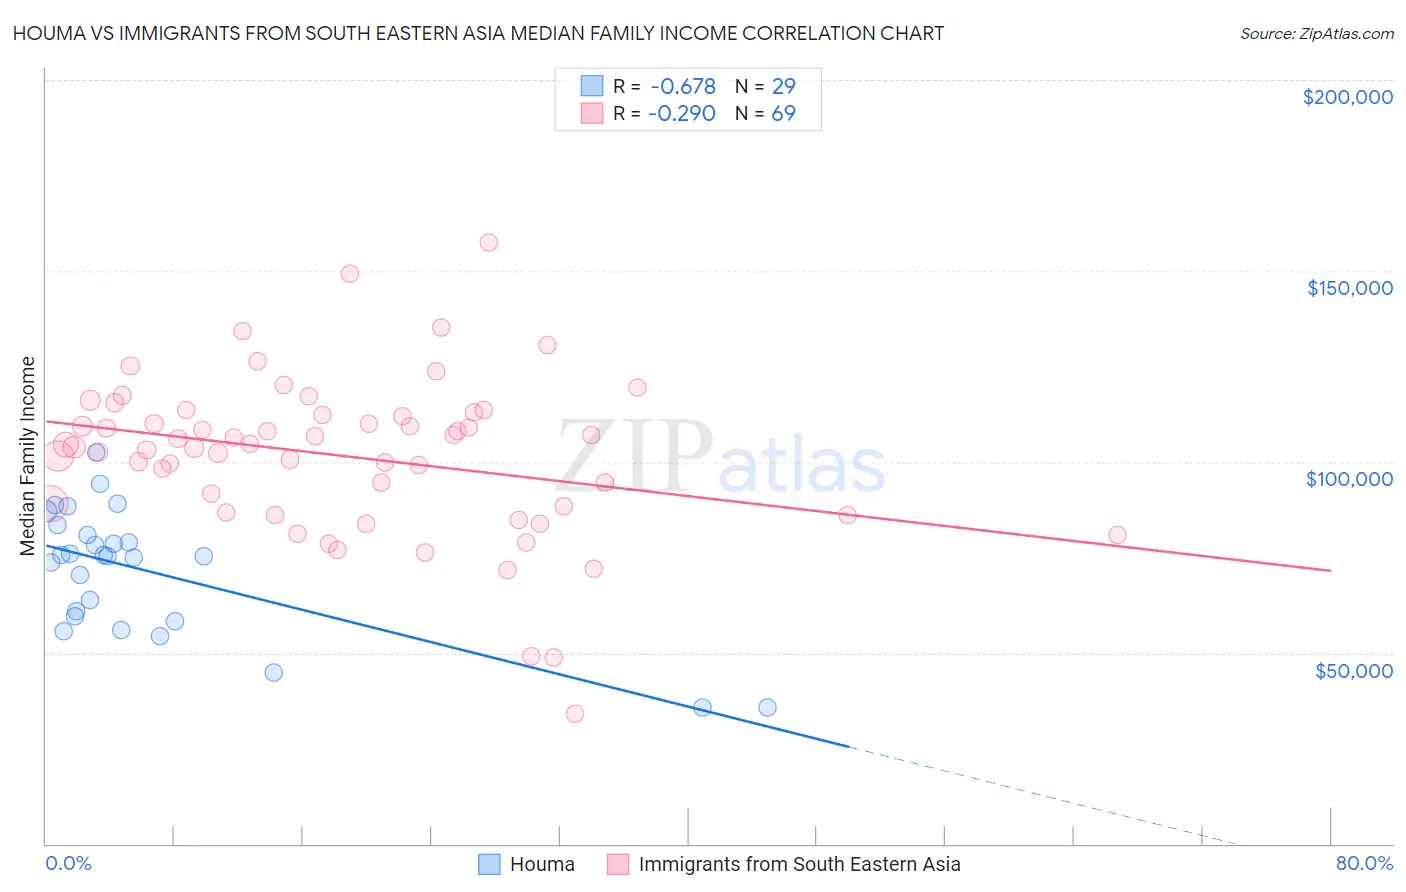 Houma vs Immigrants from South Eastern Asia Median Family Income